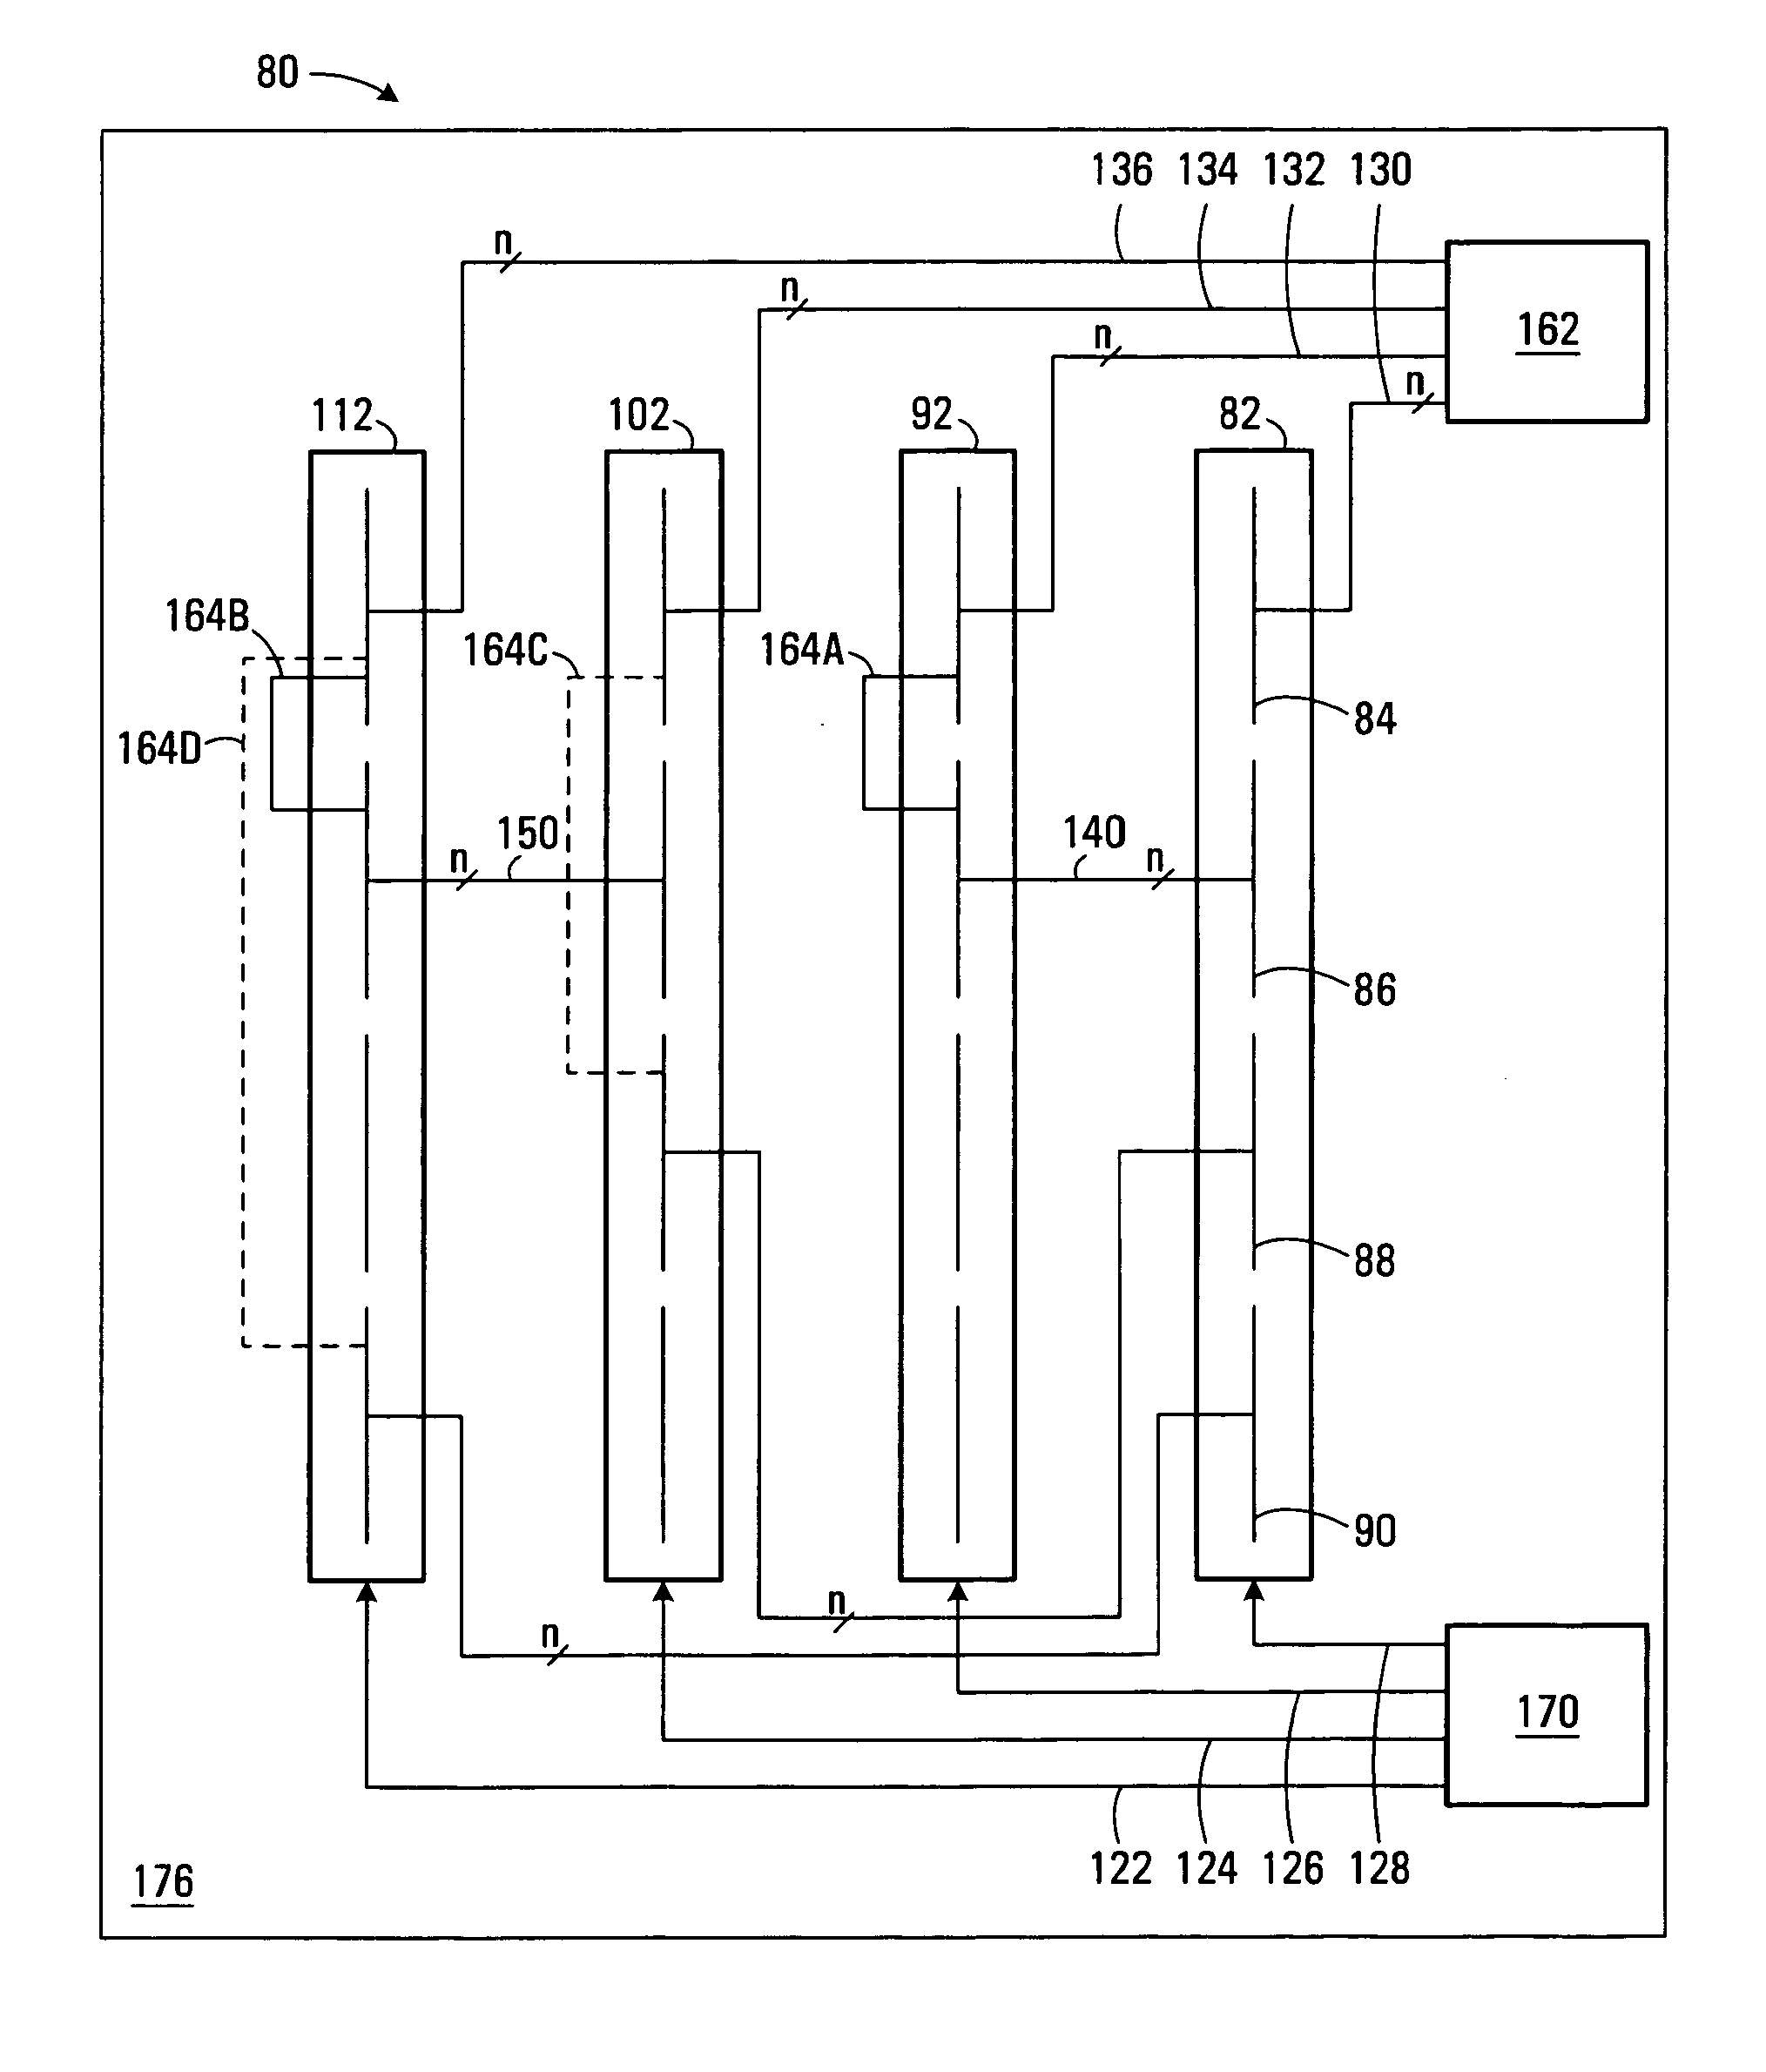 Computing device with flexibly configurable expansion slots, and method of operation